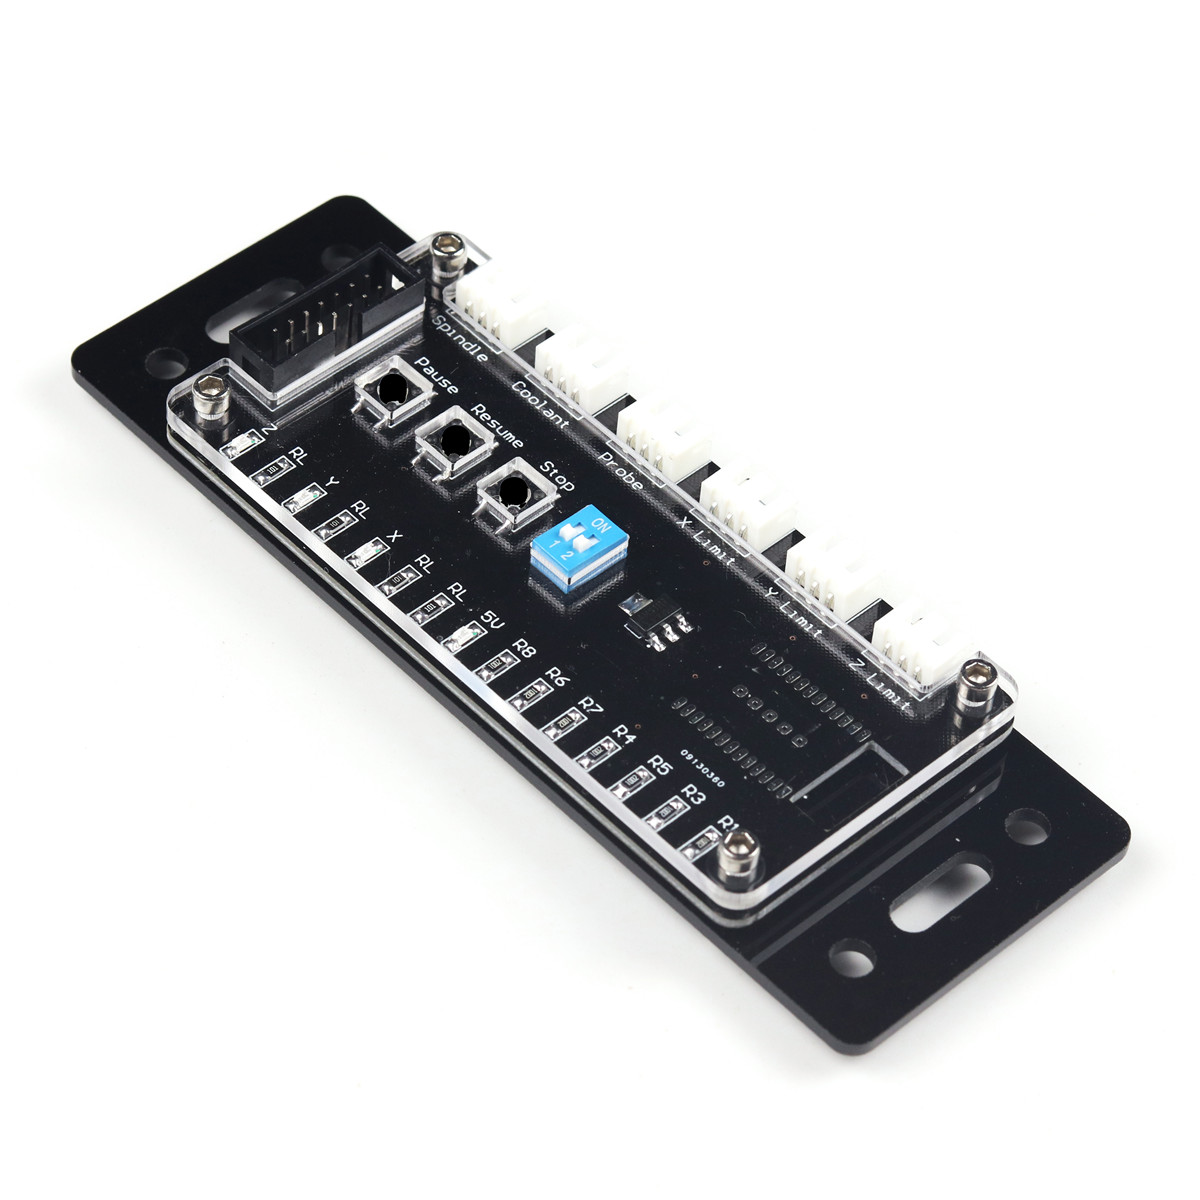 

EleksMaker® EleksExtra External Control Board Add X/Y/Z Limit Probe Coolant Spindle Functions On/Off Button For Mana ManaSE Stepper Motor Driver Board